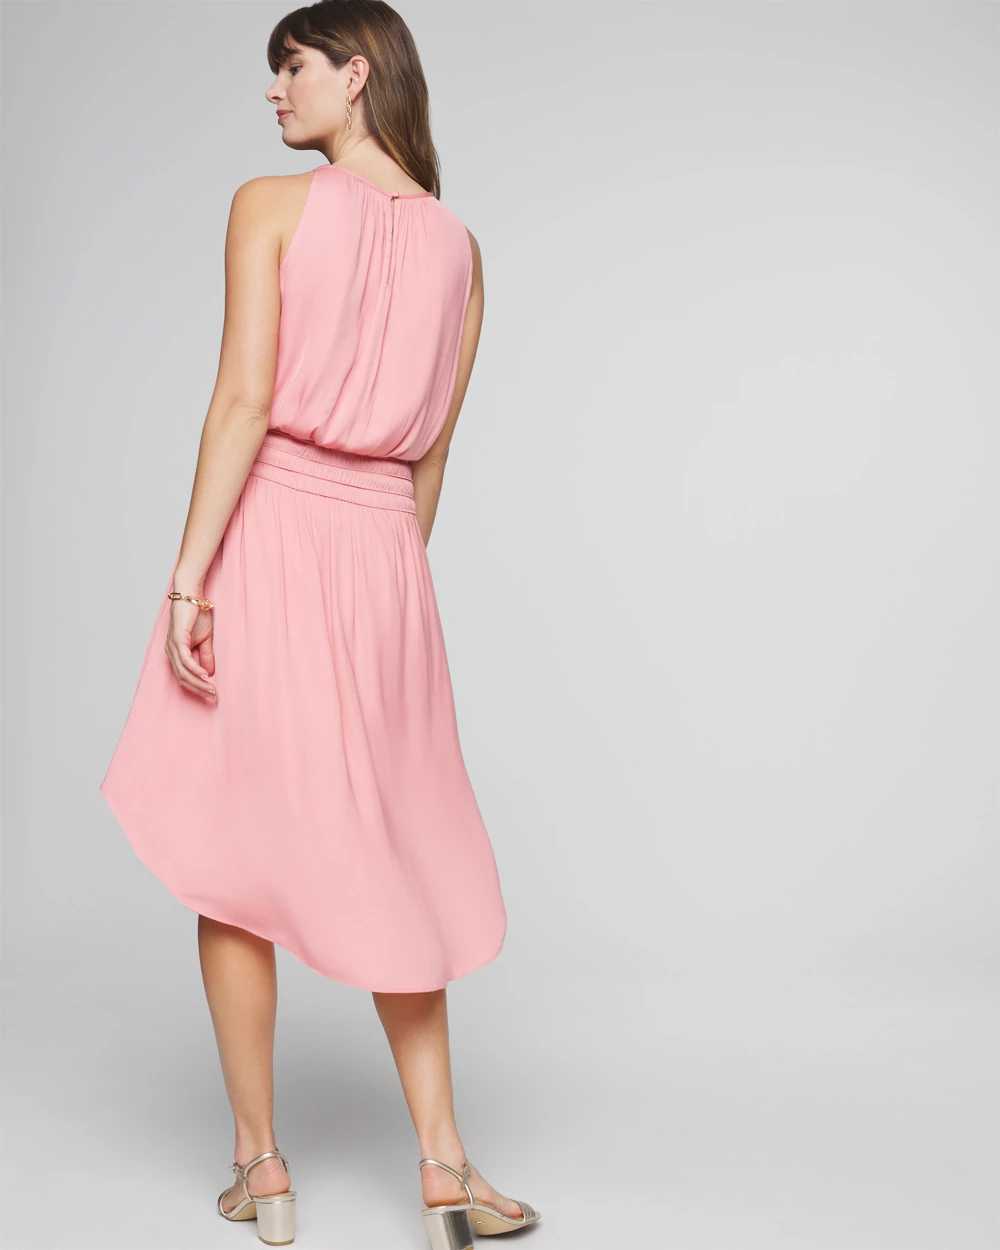 Petite High-Neck Smocked Midi Dress click to view larger image.